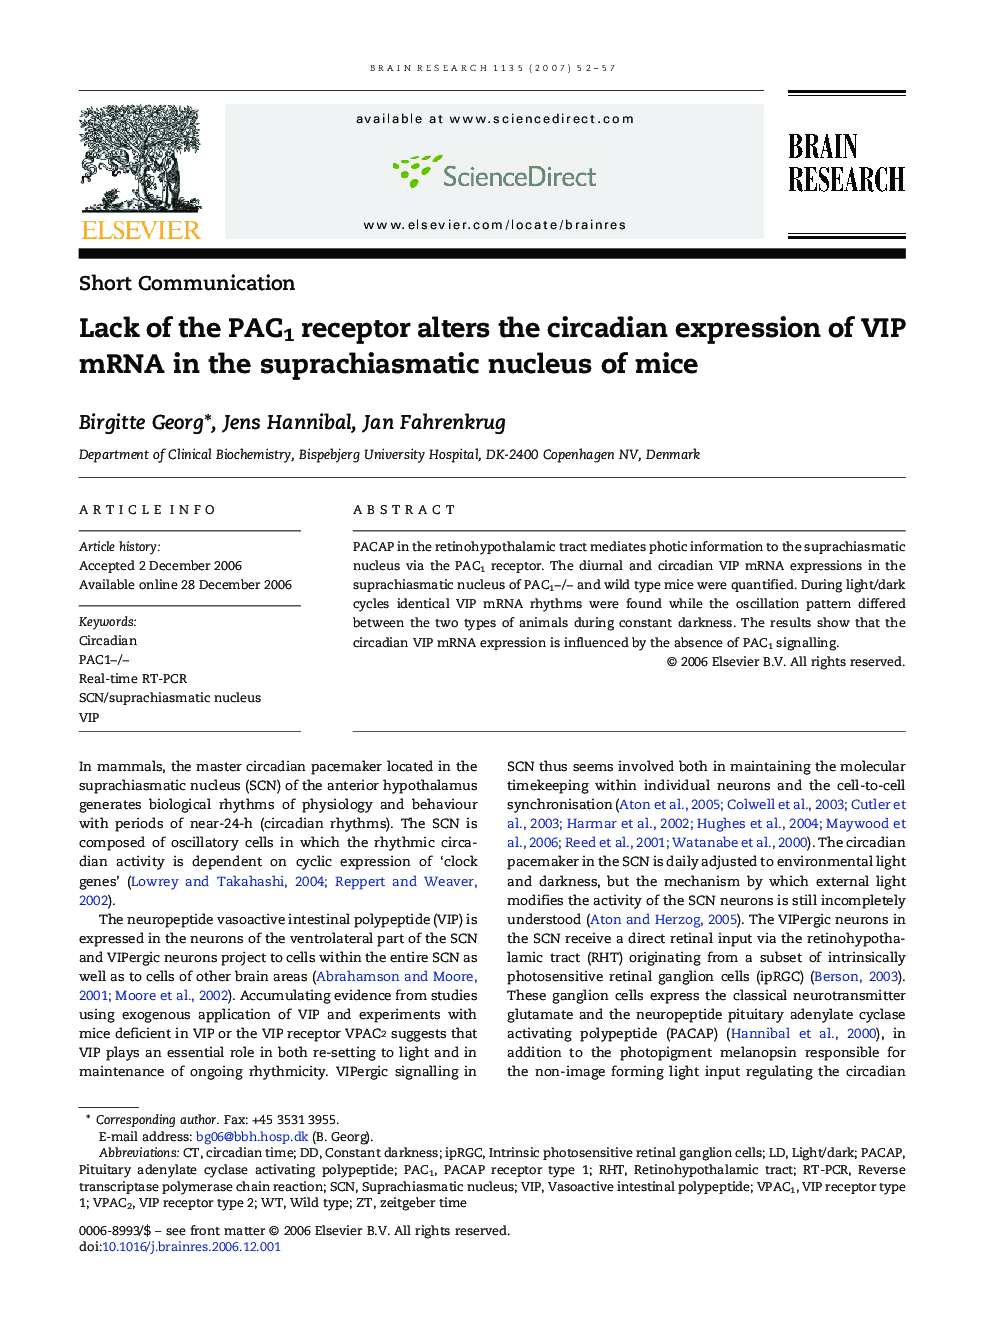 Lack of the PAC1 receptor alters the circadian expression of VIP mRNA in the suprachiasmatic nucleus of mice